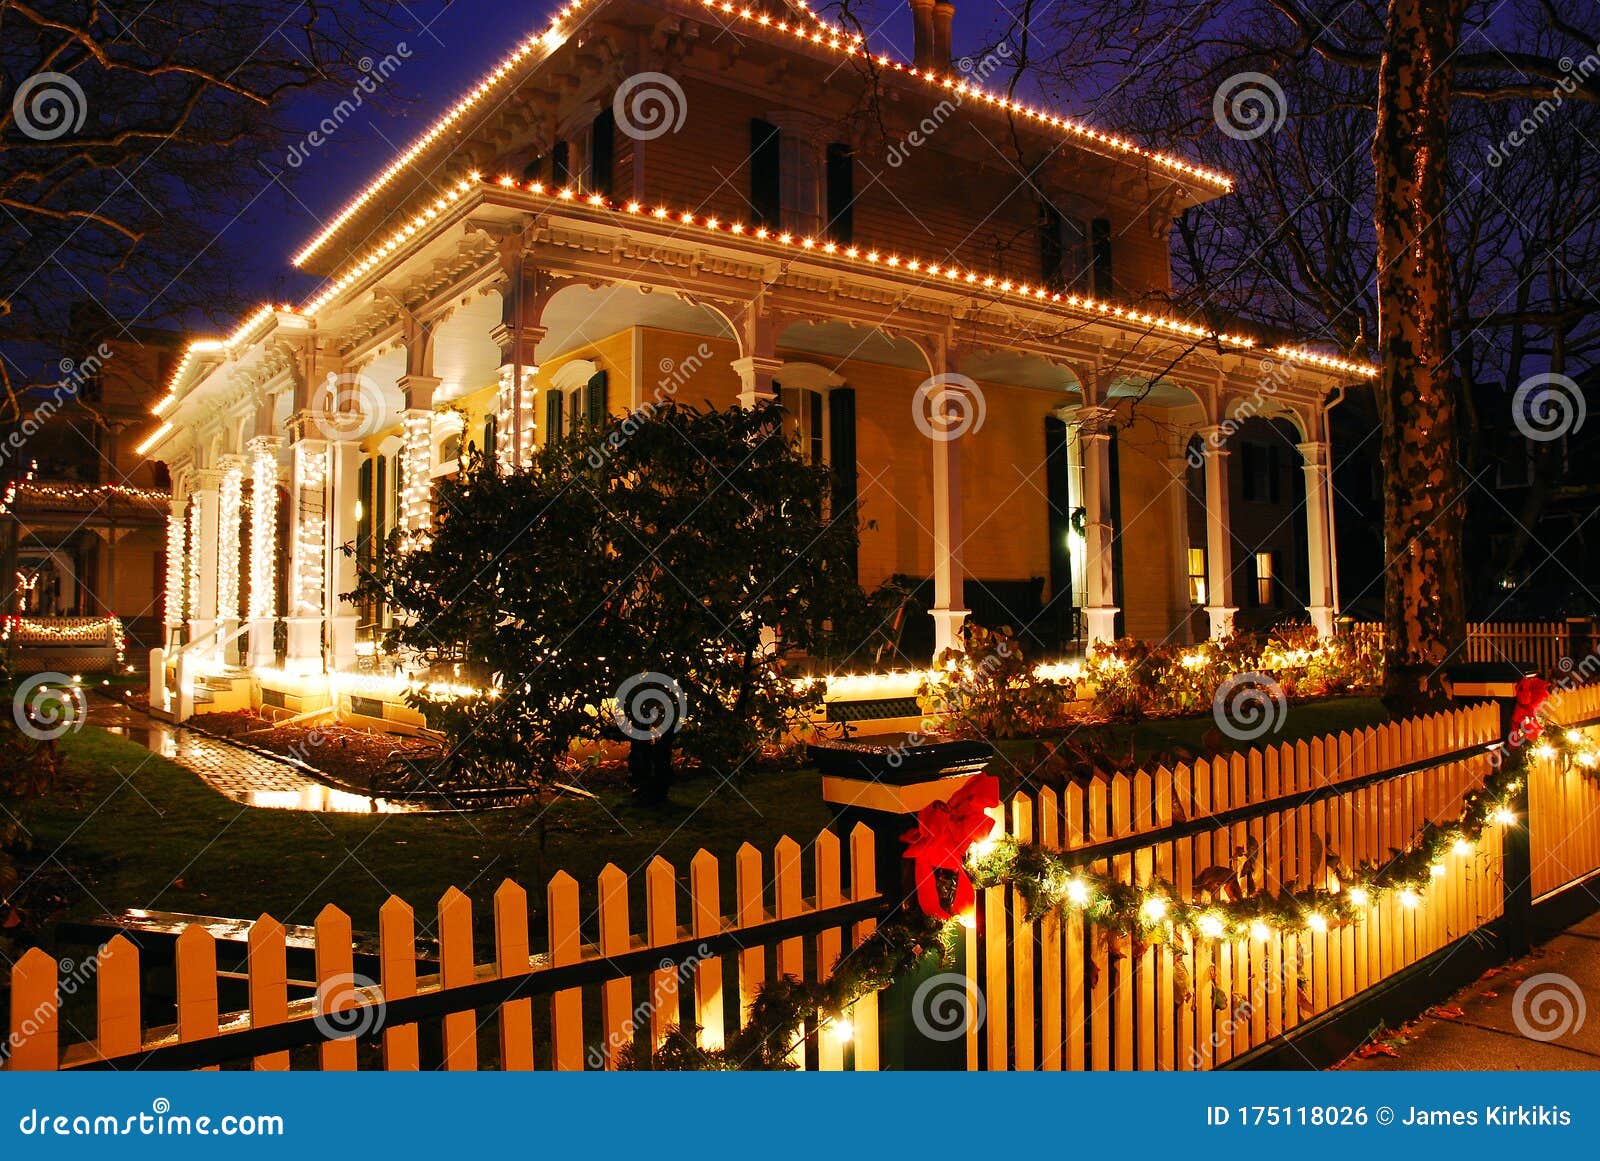 Christmas Lights and Holly Decorate a Victorian Home Editorial ...